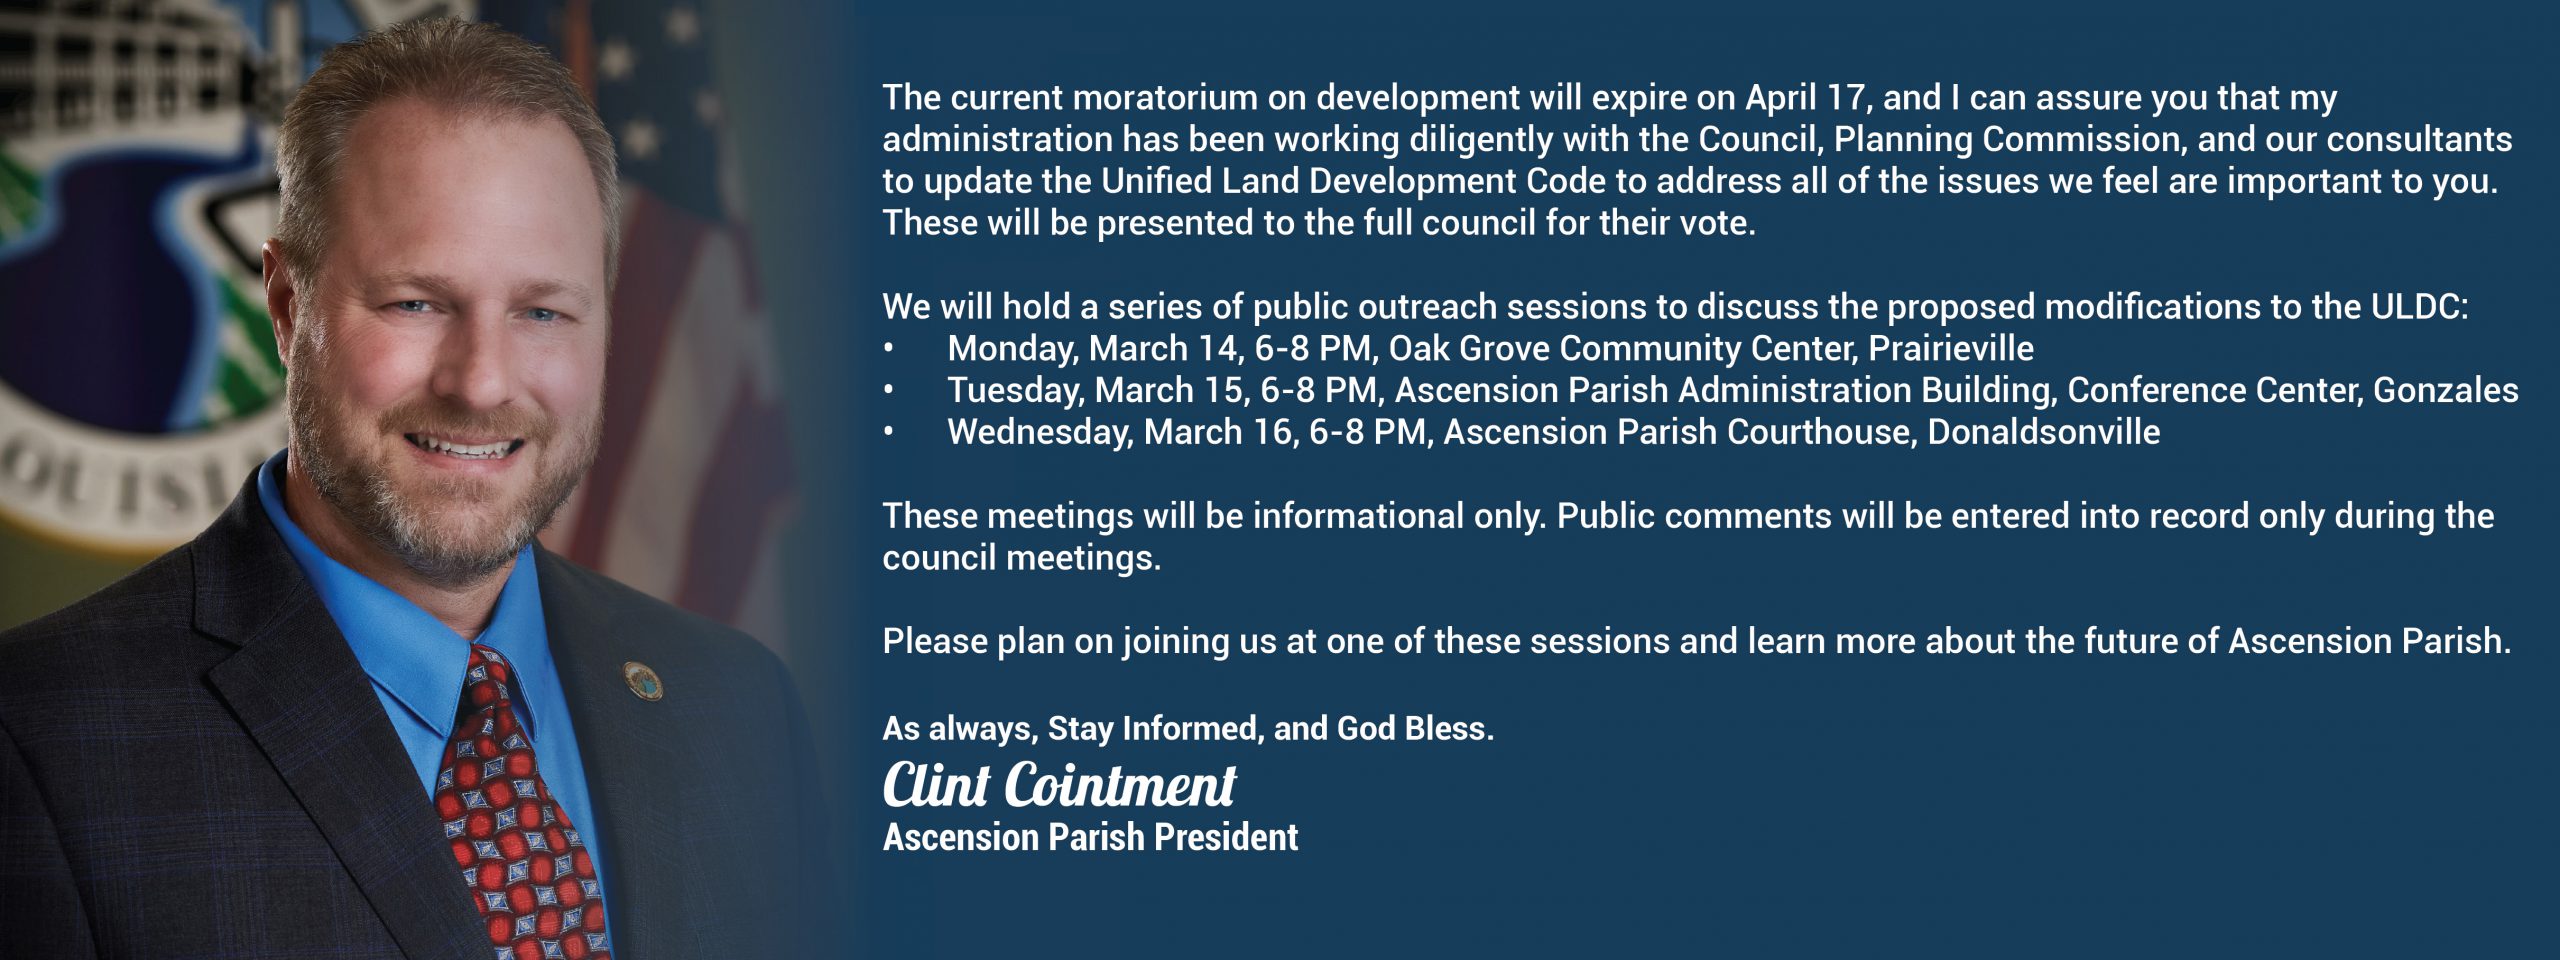 The current moratorium on development will expire on April 17, and I can assure you that my administration has been working diligently with the Council, Planning Commission, and our consultants to update the Unified Land Development Code to address all of the issues we feel are important to you. These will be presented to the full council for their vote. We will hold a series of public outreach sessions to discuss the proposed modifications to the ULDC: • Monday, March 14, 6-8 PM, Oak Grove Community Center, Prairieville • Tuesday, March 15, 6-8 PM, Ascension Parish Administration Building, Conference Center, Gonzales • Wednesday, March 16, 6-8 PM, Ascension Parish Courthouse, Donaldsonville These meetings will be informational only. Public comments will be entered into record only during the council meetings. Please plan on joining us at one of these sessions and learn more about the future of Ascension Parish.